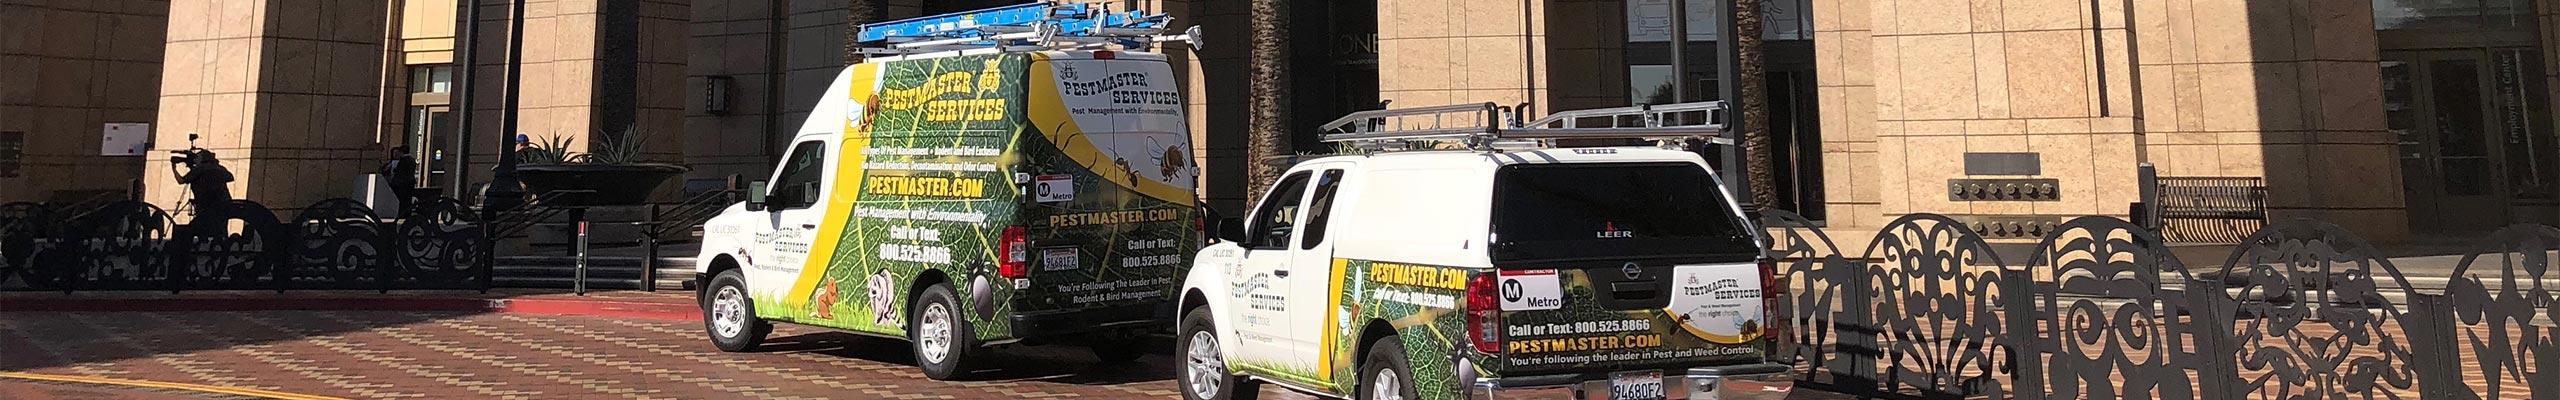 two pestmaster services company vehicles parked outside a commercial building